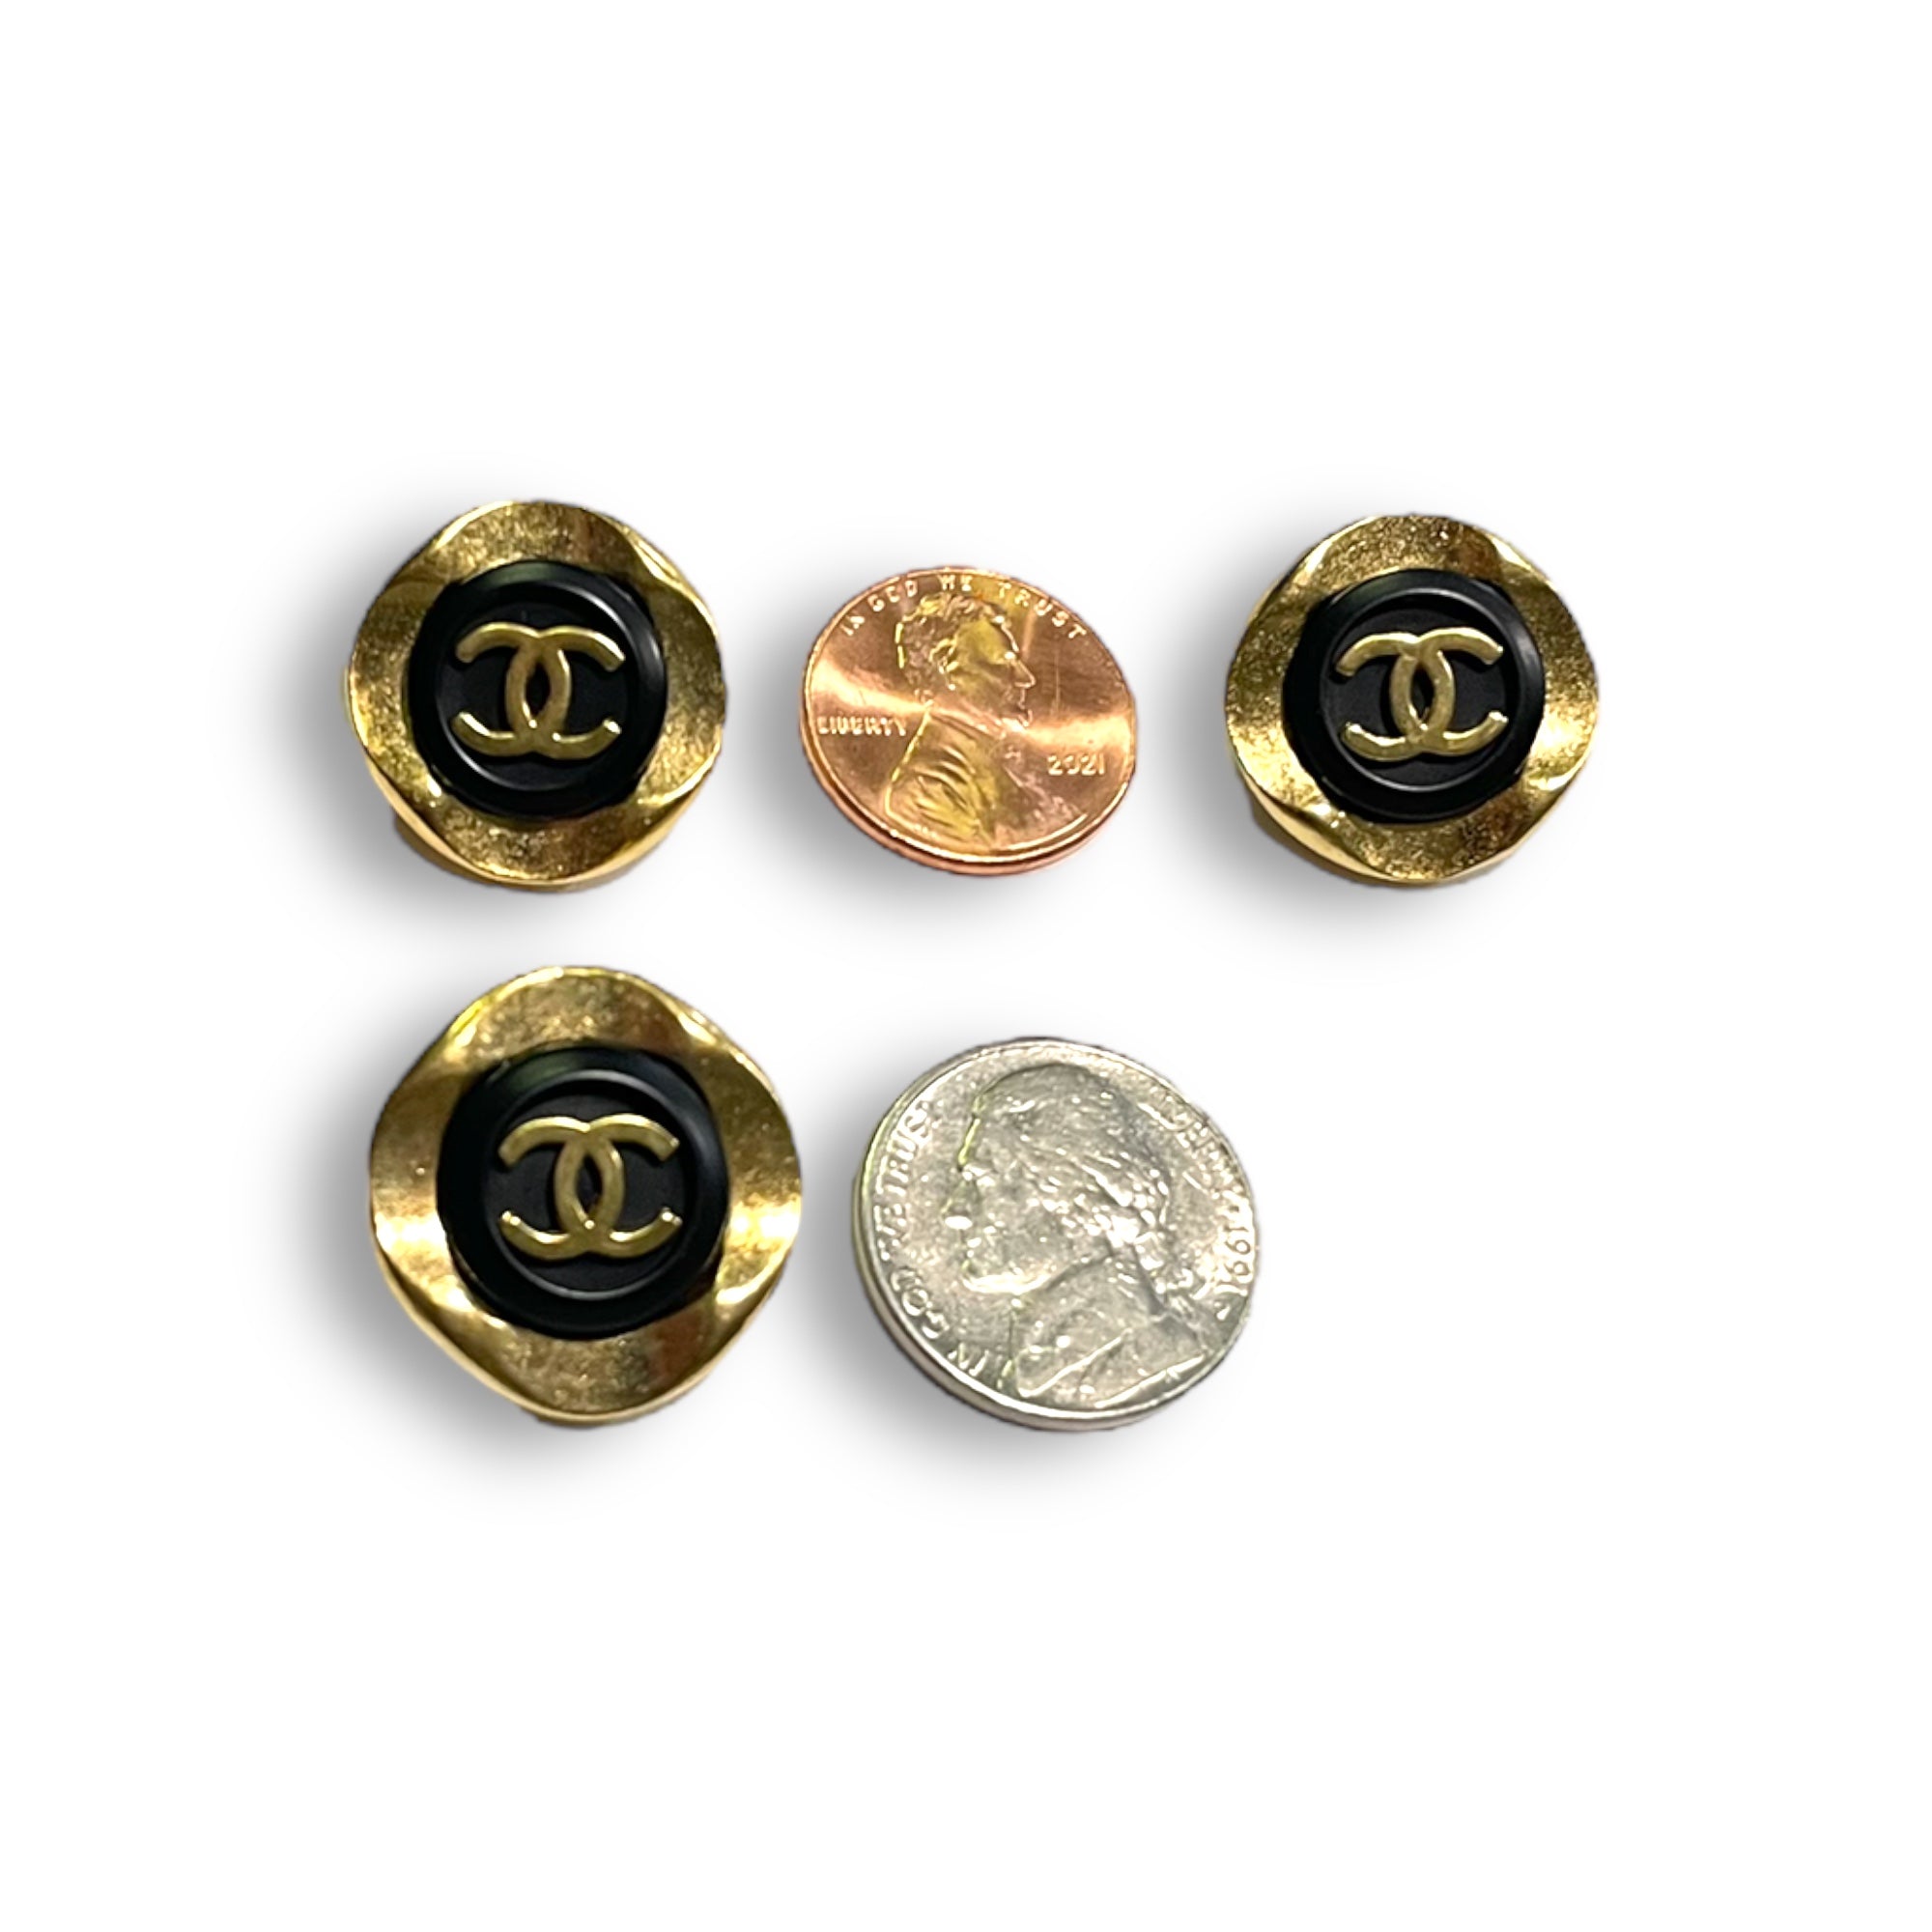 CHANEL Vintage AUTHENTIC Gold Metal CC Logo Set in Black Center Buttons (Three)